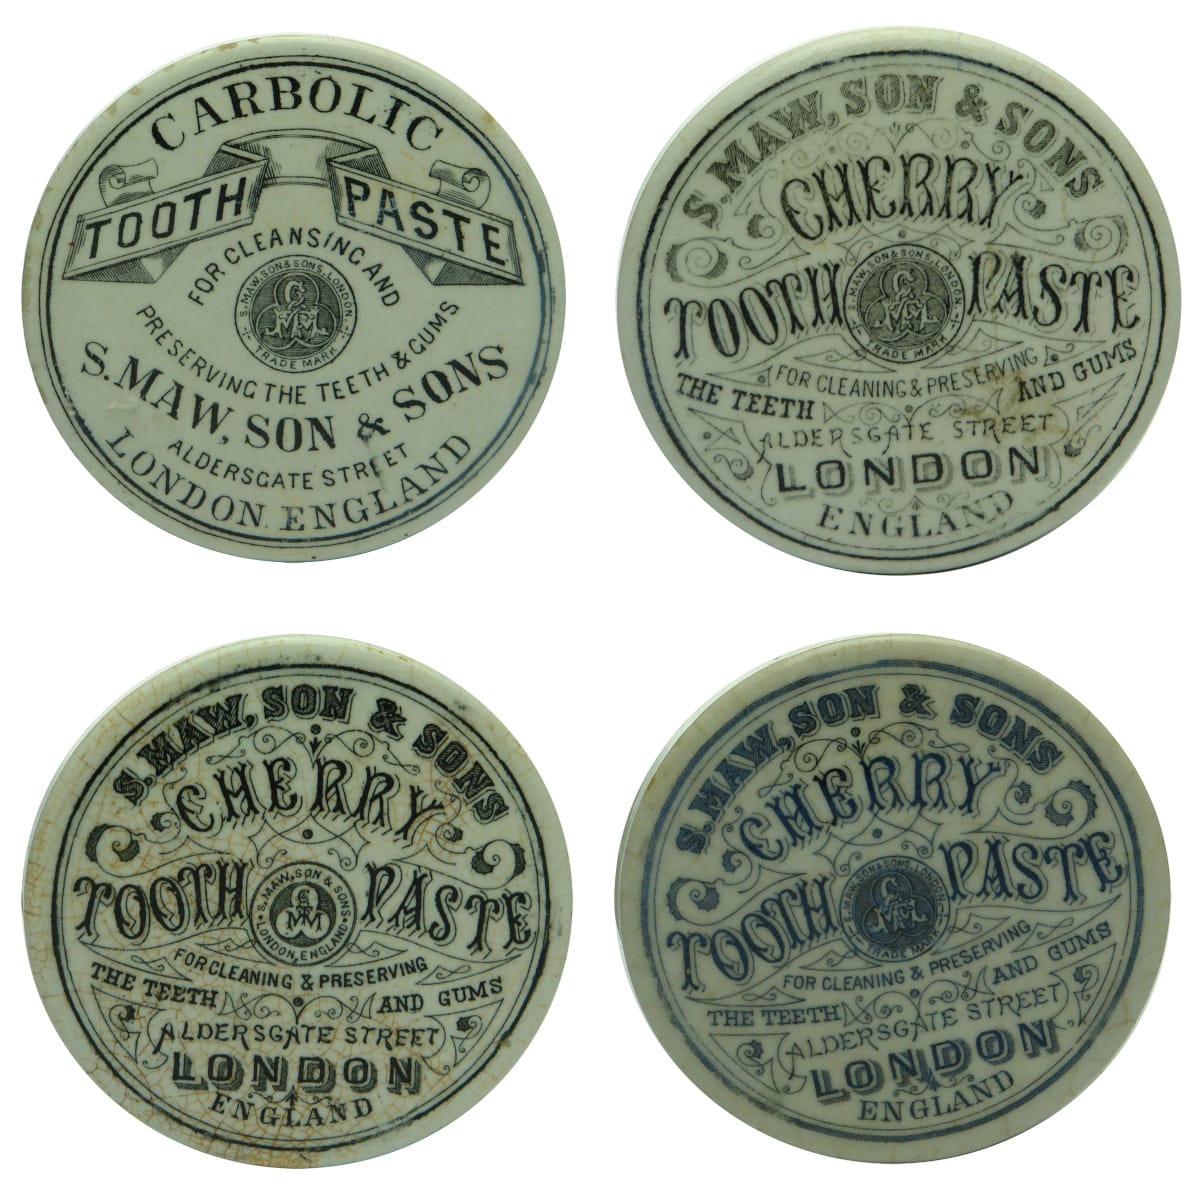 4 S. Maw Son & Sons Pot Lids. Carbolic & Cherry Tooth Pastes. London.